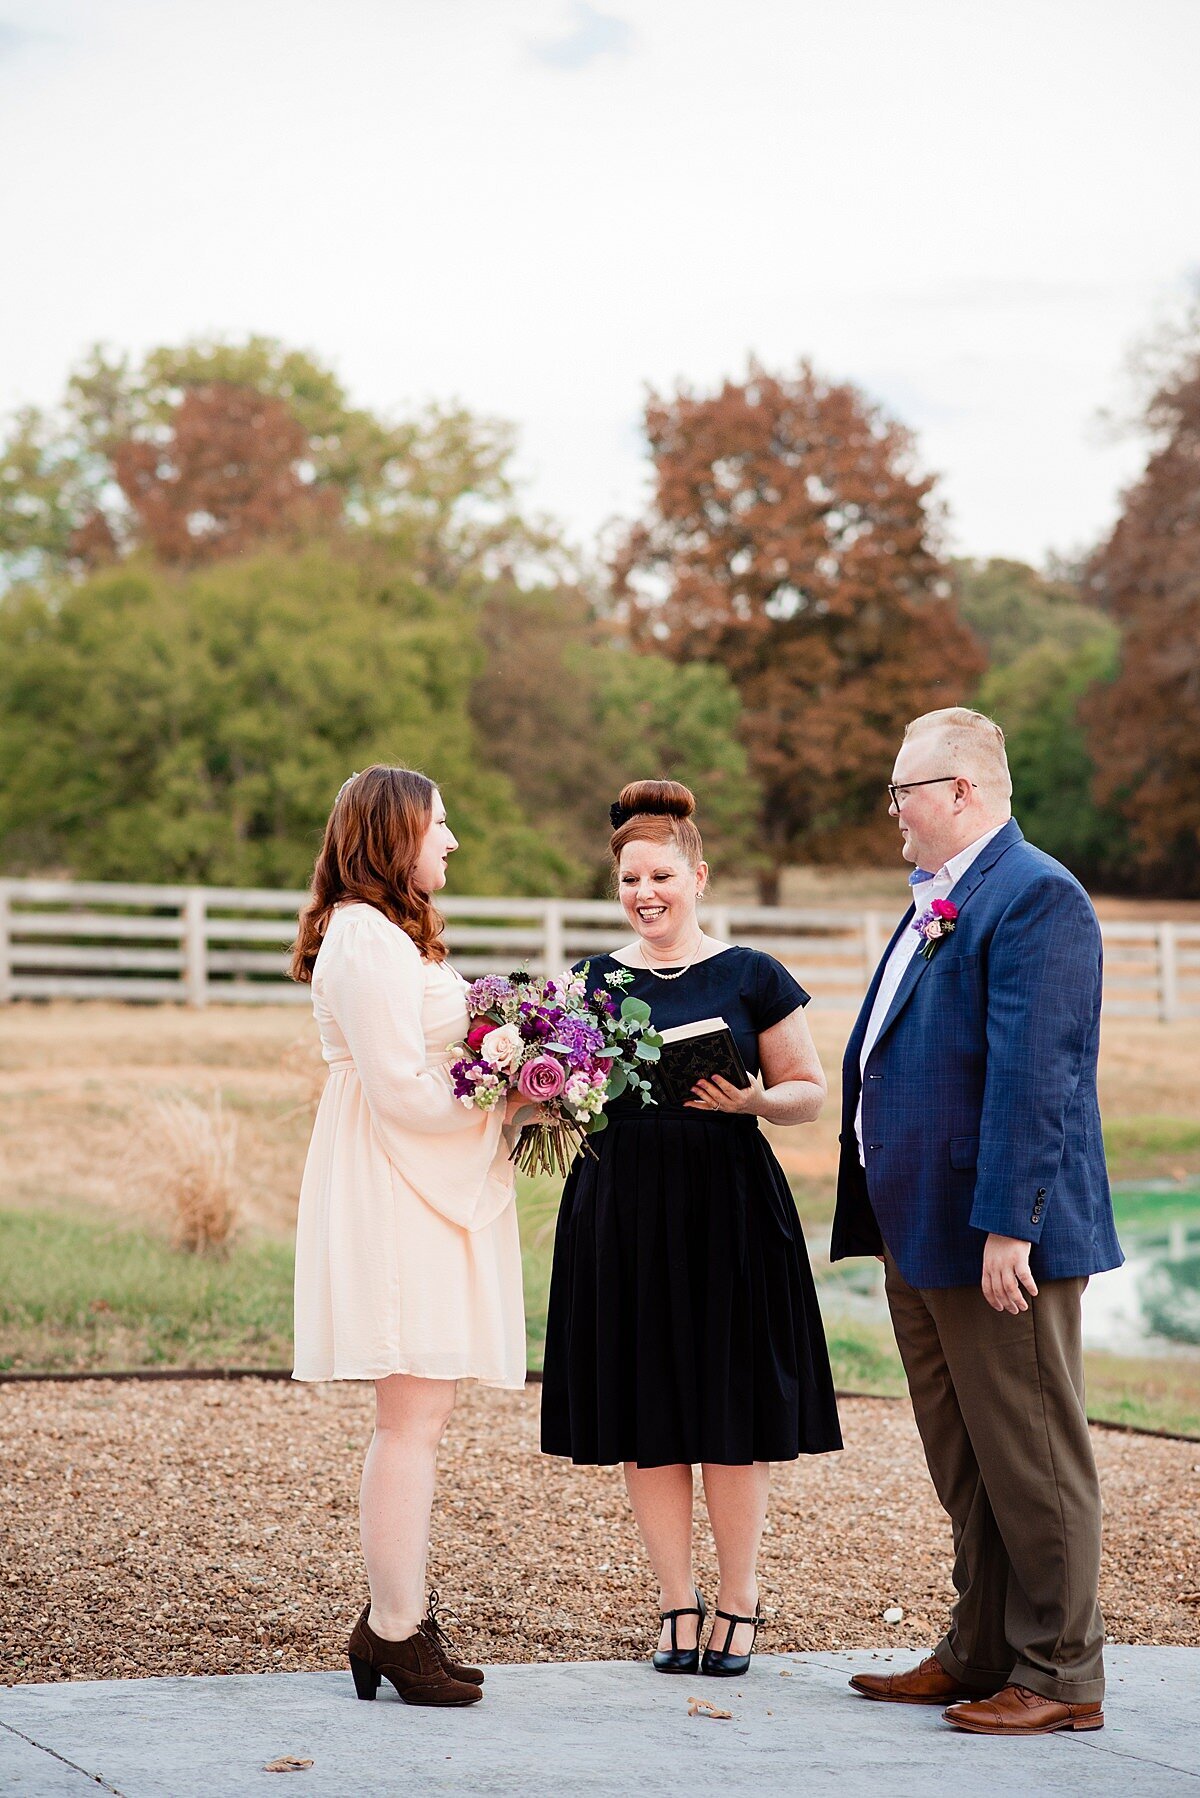 An elopement at Steel Magnolia Barn. The bride is wearing a knee length ivory boho dress with long bell sleeves and short brown booties with heels. She is holding a large bouquet of pink, purple, ivory and burgundy flowers with greenery as she and the groom look at the officiant. The officiant is wearing a knee length black dress t-strap heels. She is holding a leather bound book as she reads. The groom is wearing brown pants and shoes with a white shirt and cobalt blue jacket. He has a pink boutonniere pinned to his lapel.